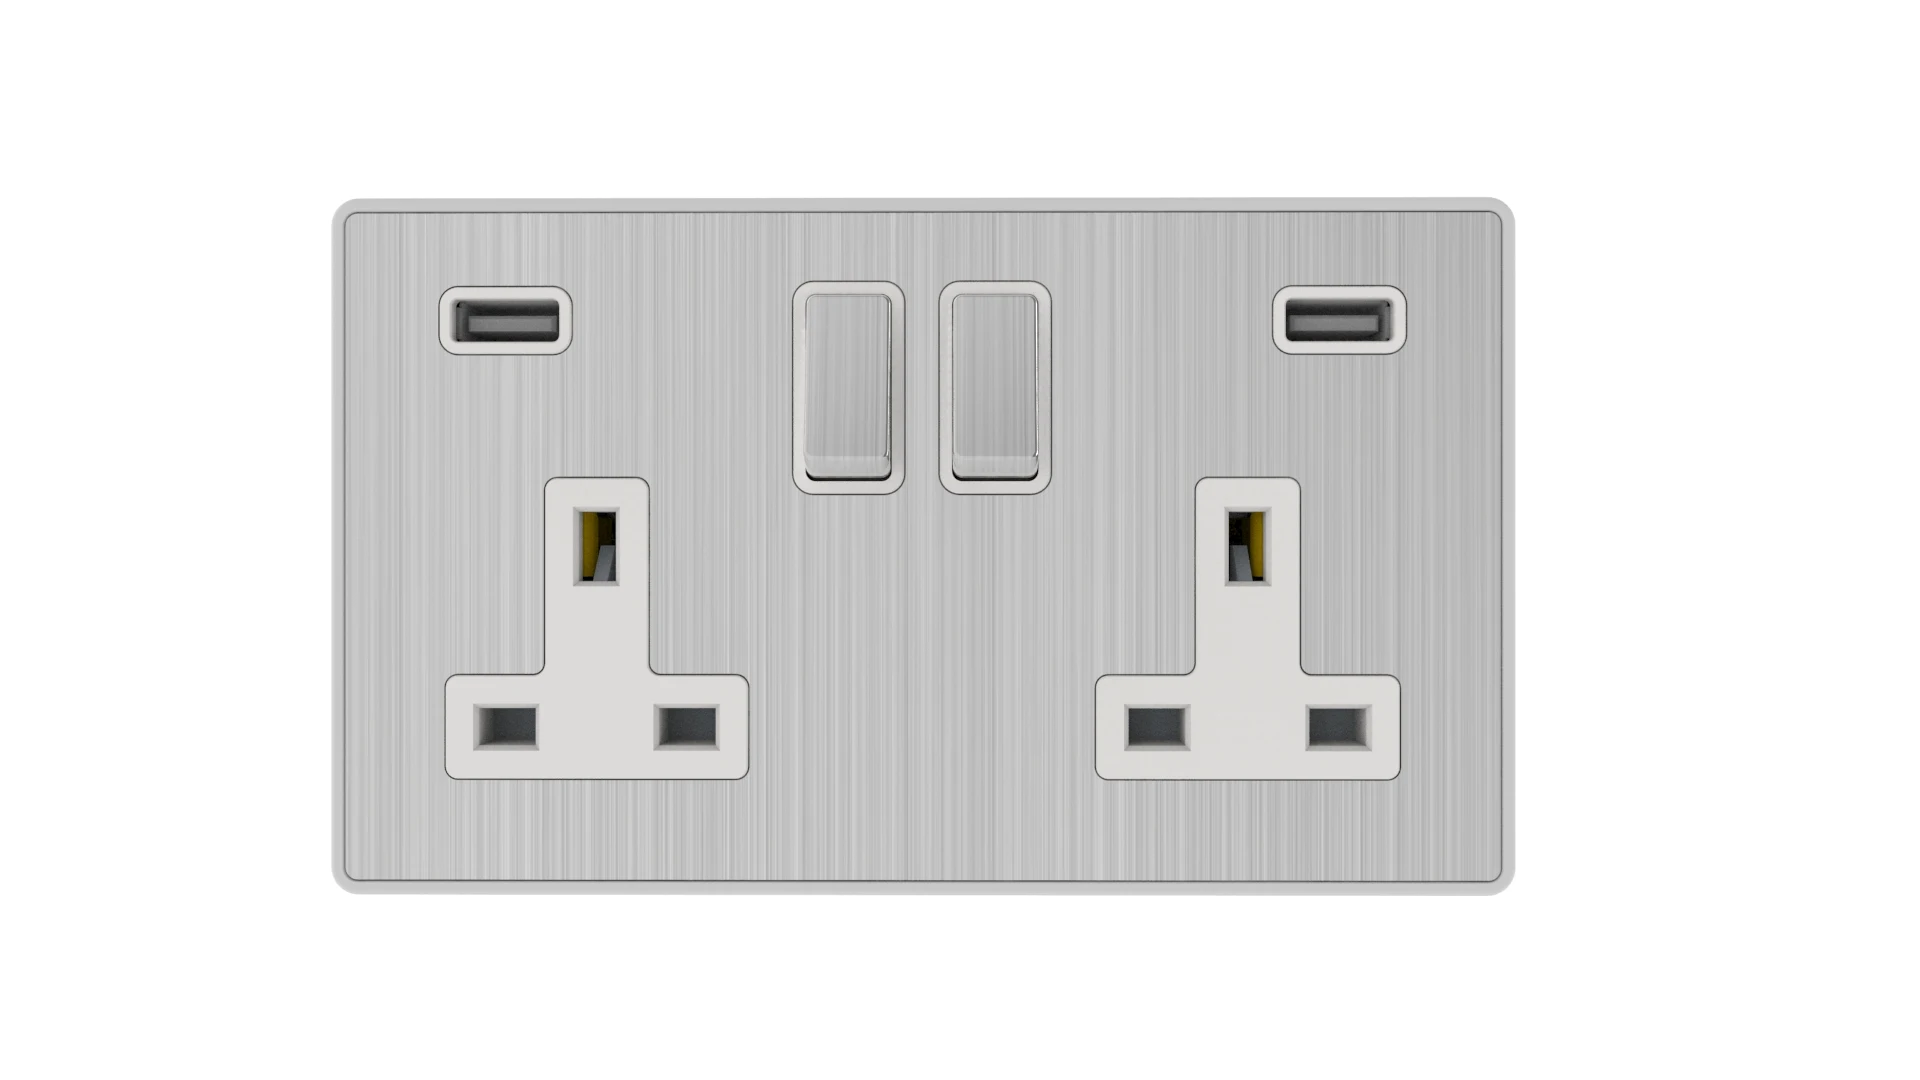 USB plug wall socket 13A 2 gang switched socket+2 USB outlet, total USB output 3.1A